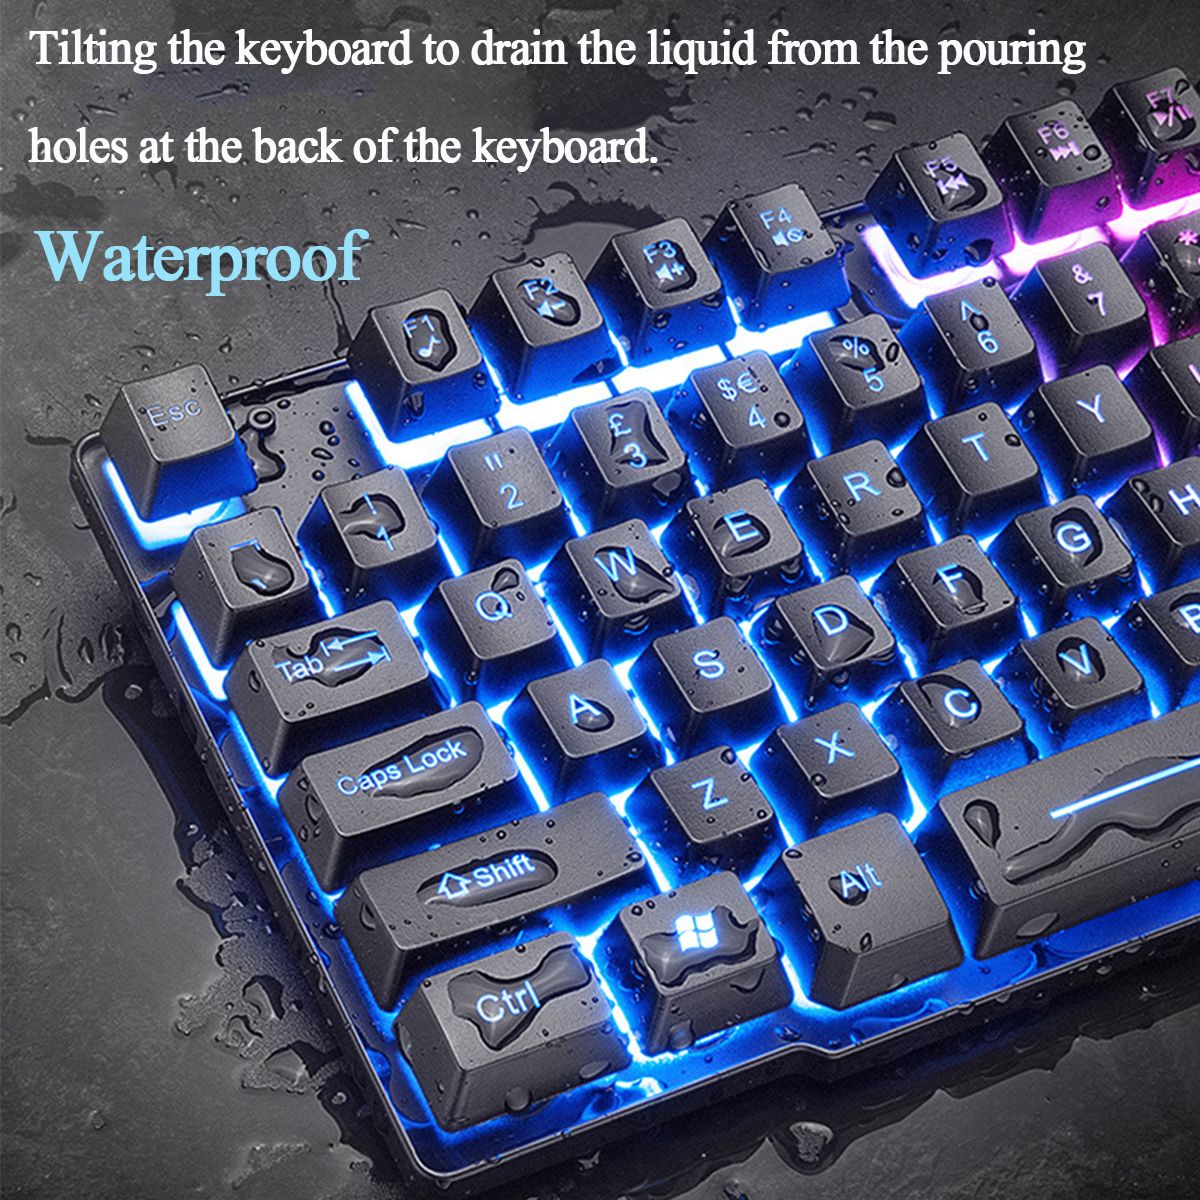 104-Key-USB-Wired-Gaming-Keyboard-and-Mouse-1600-DPI-Set-with-Mouse-Pad-Waterproof-Backlight-for-Lap-1768521